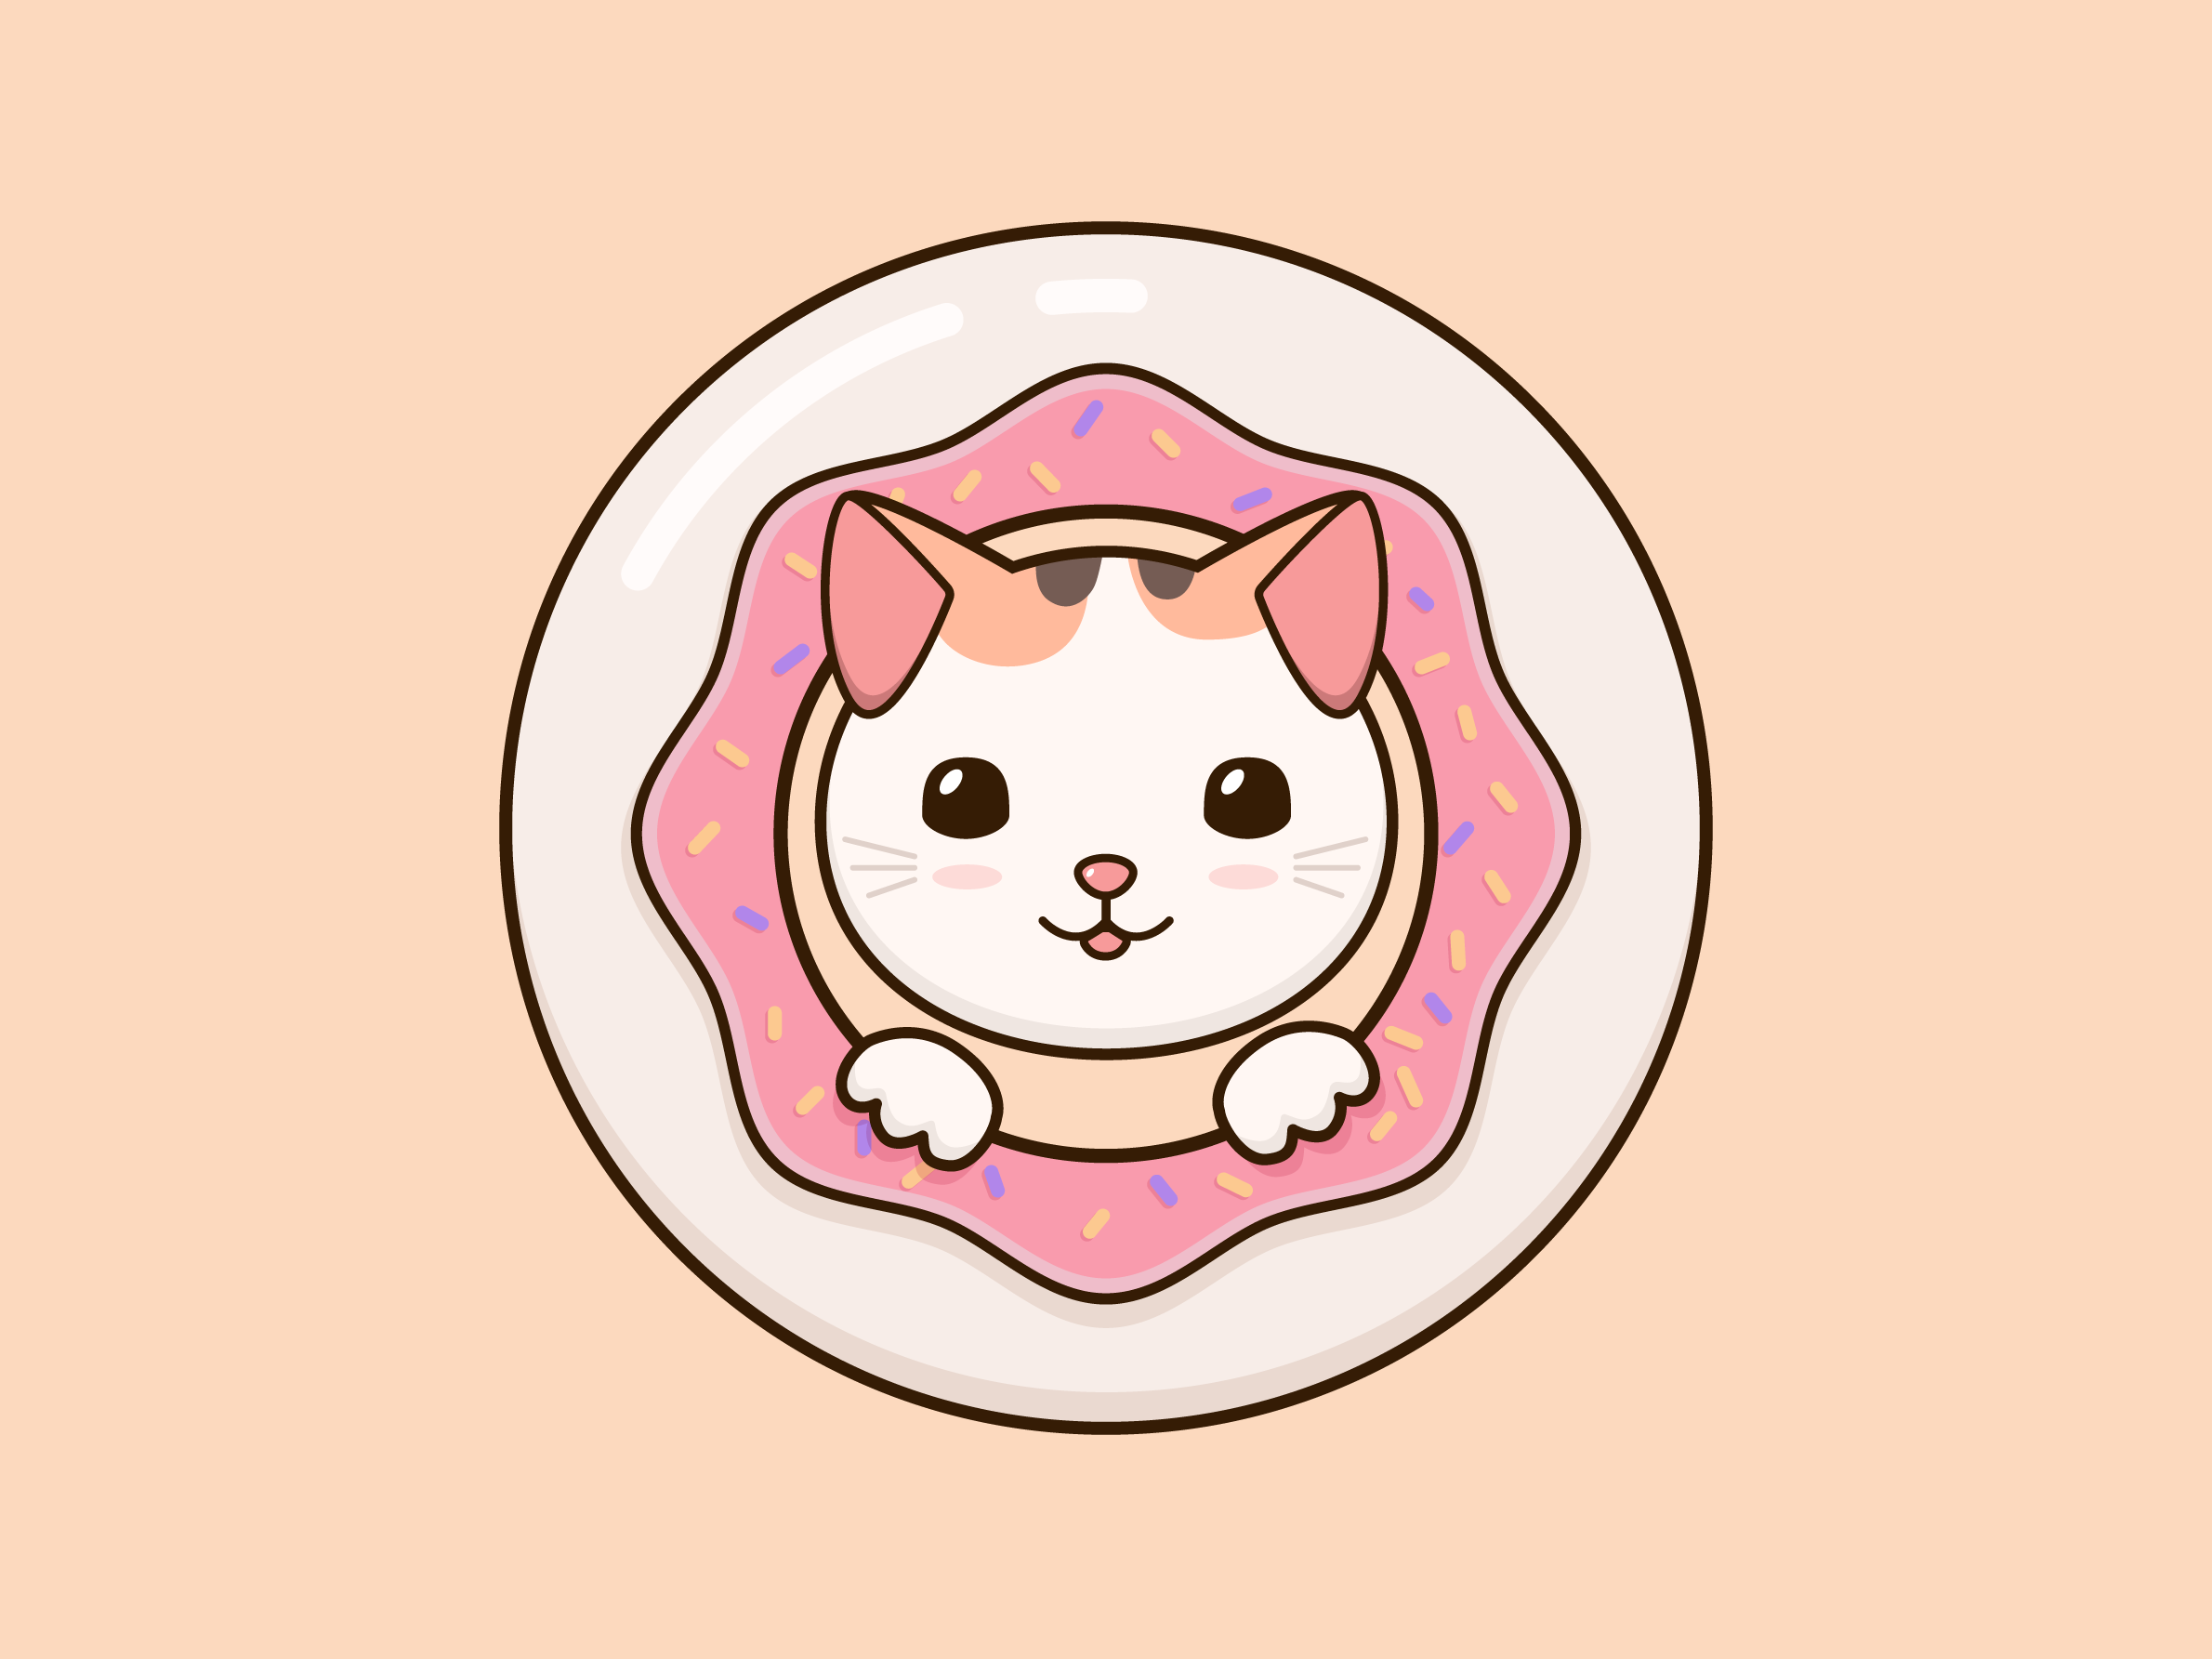 Cat in a doughnut by Anastasia on Dribbble